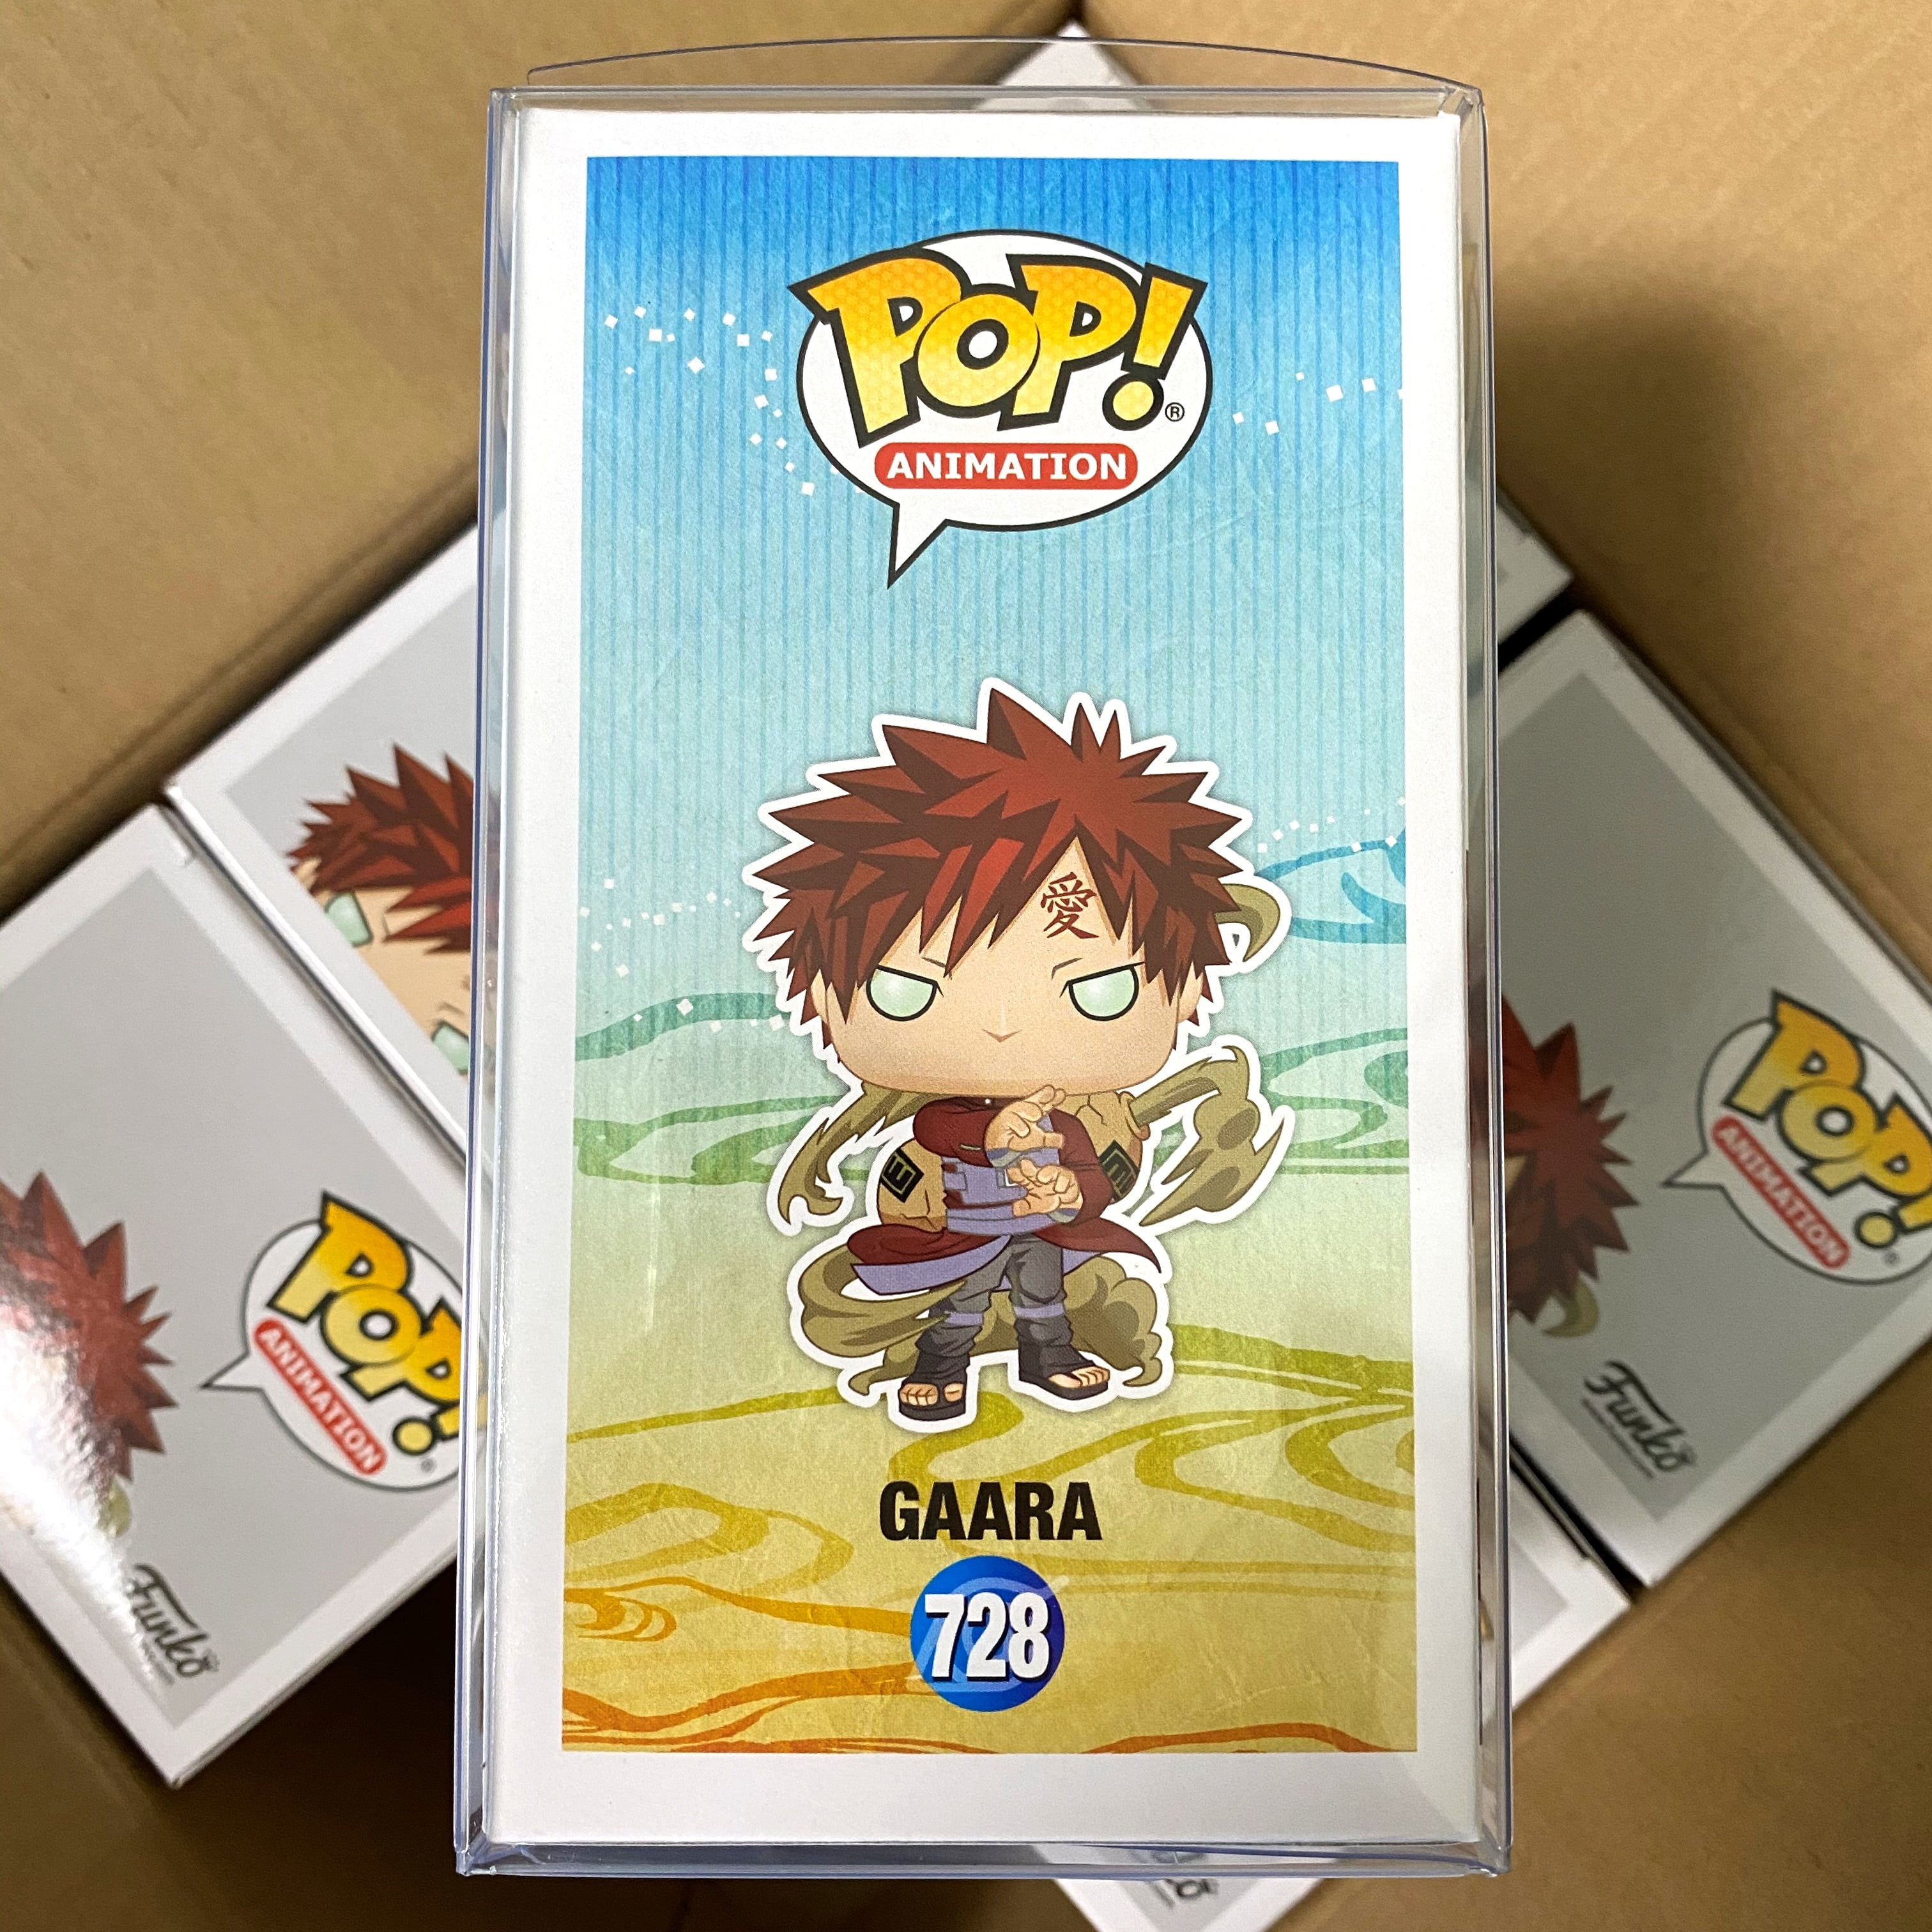 Gaara Funko Pop! #728 with Protector - Hot Topic Exclusive - Naruto